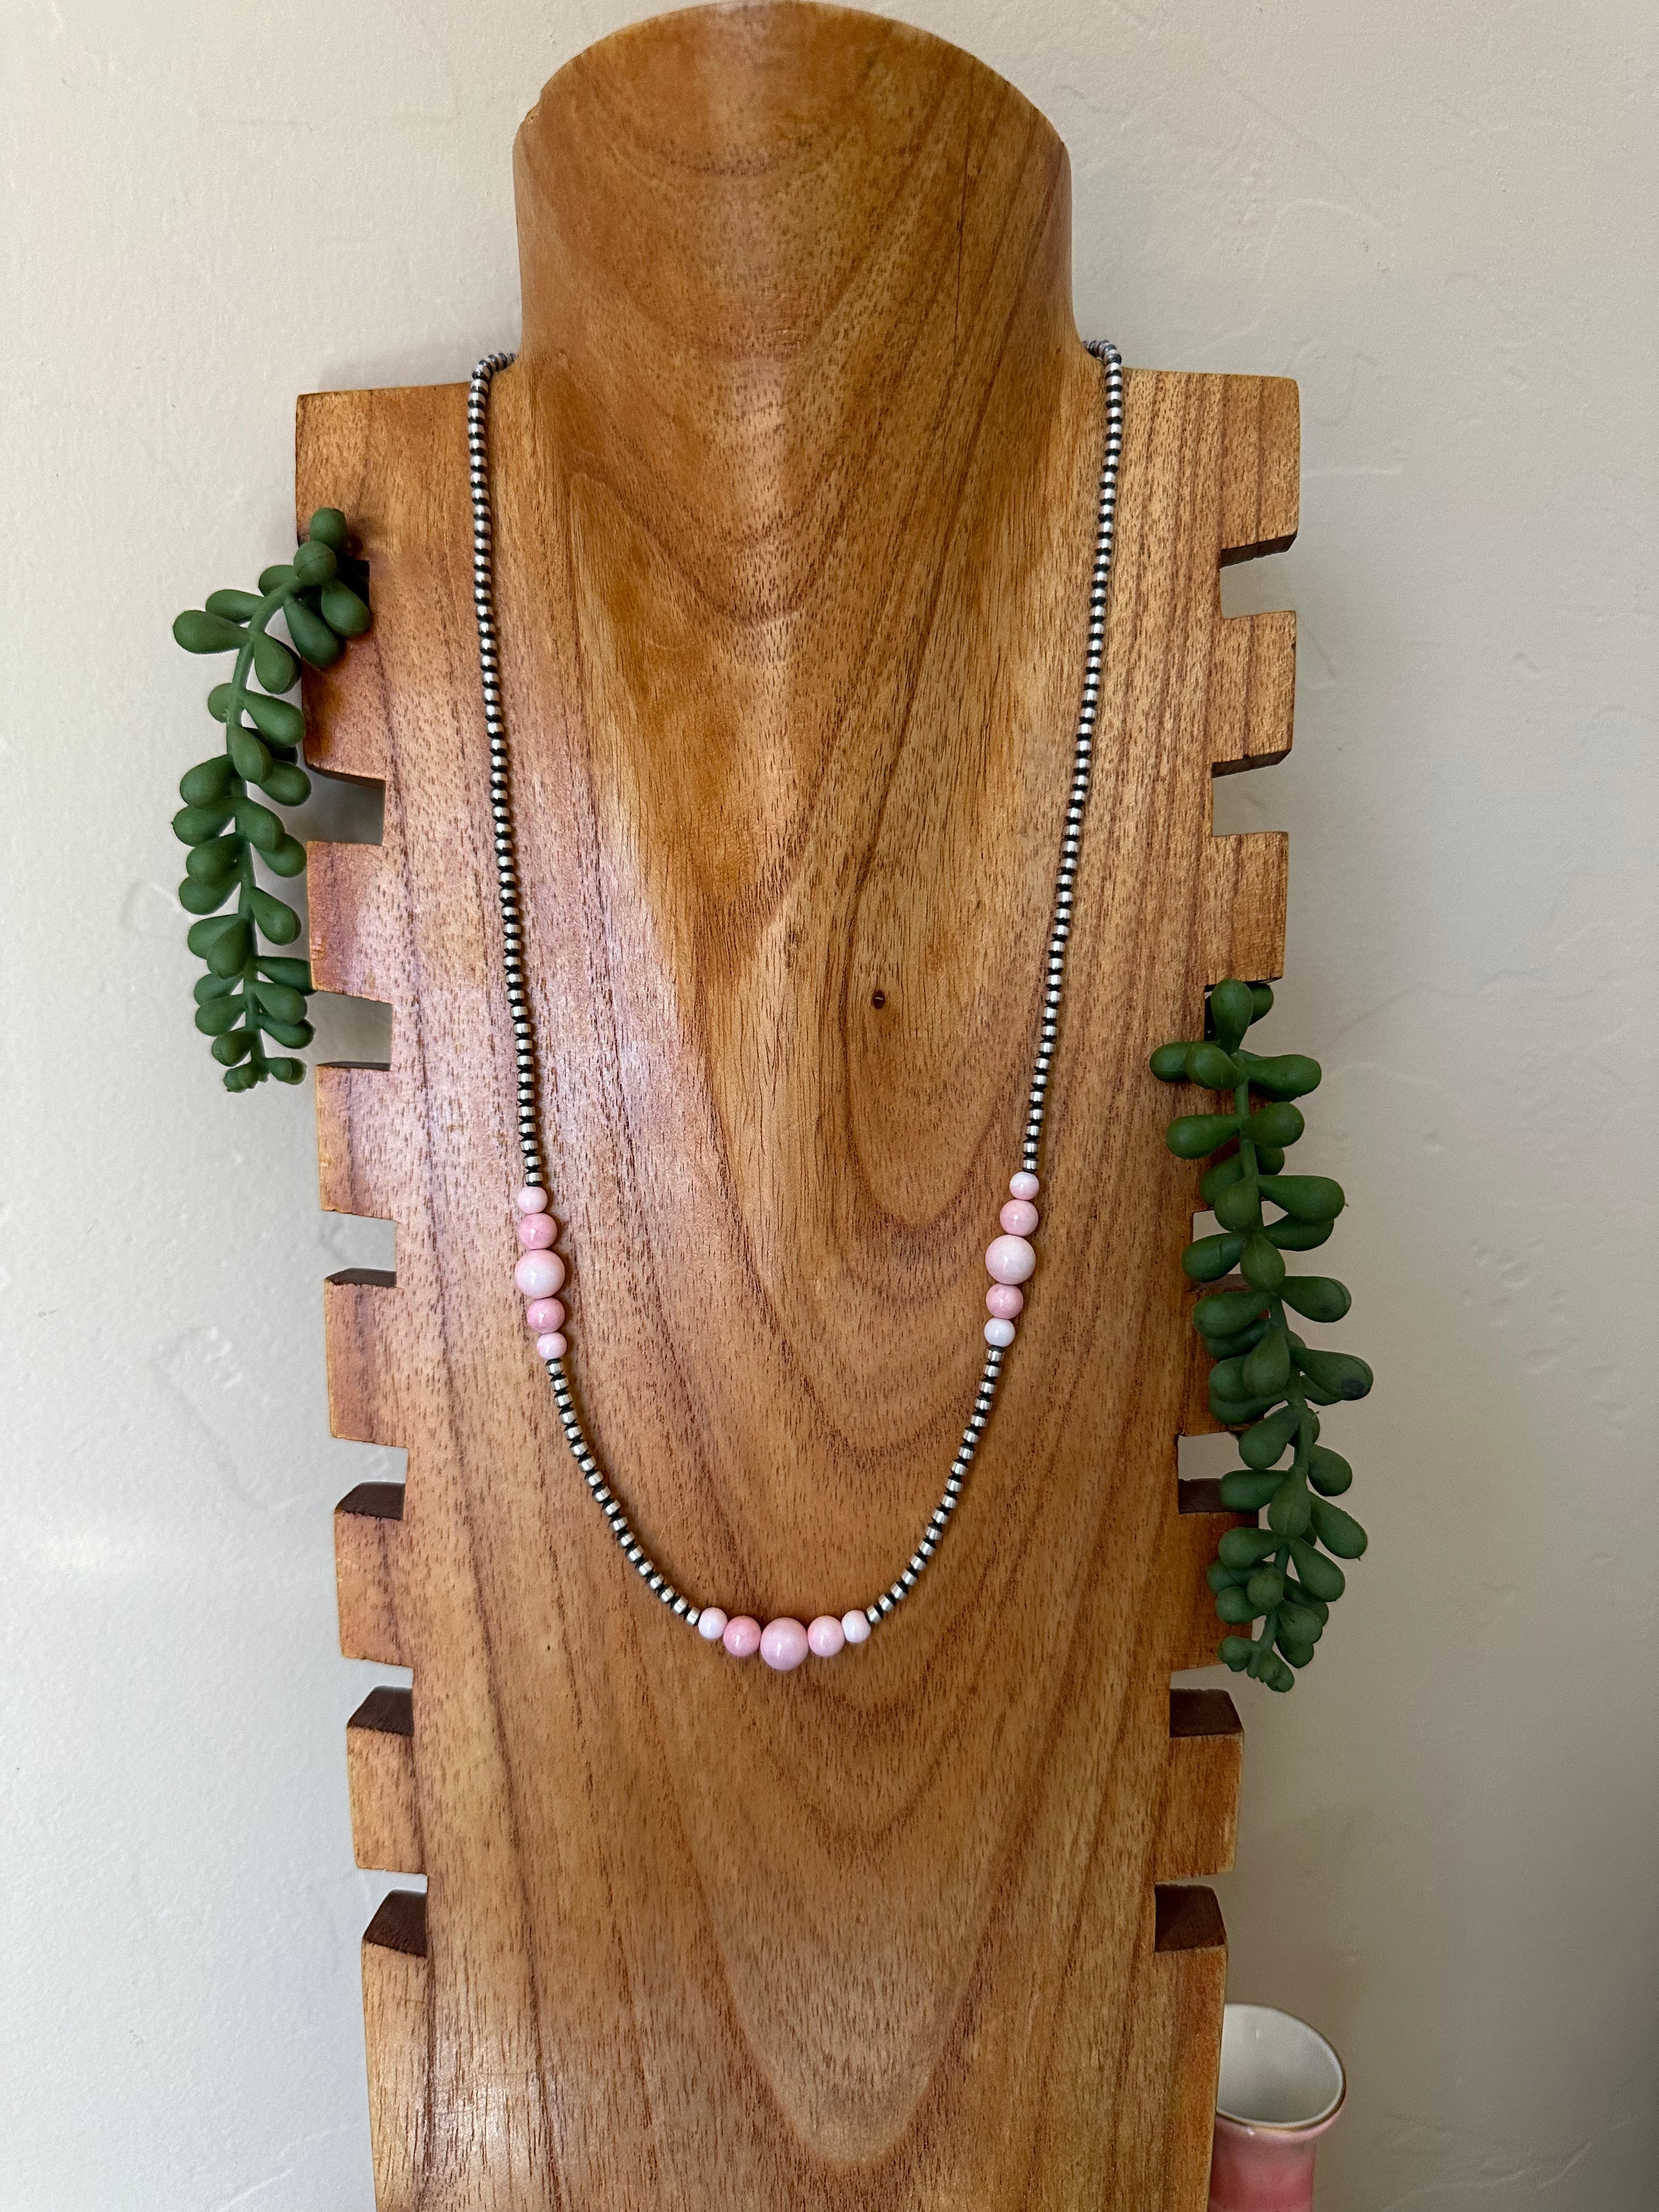 Navajo Strung Pink Conch & Sterling Silver 3 MM Pearls Beaded Necklace